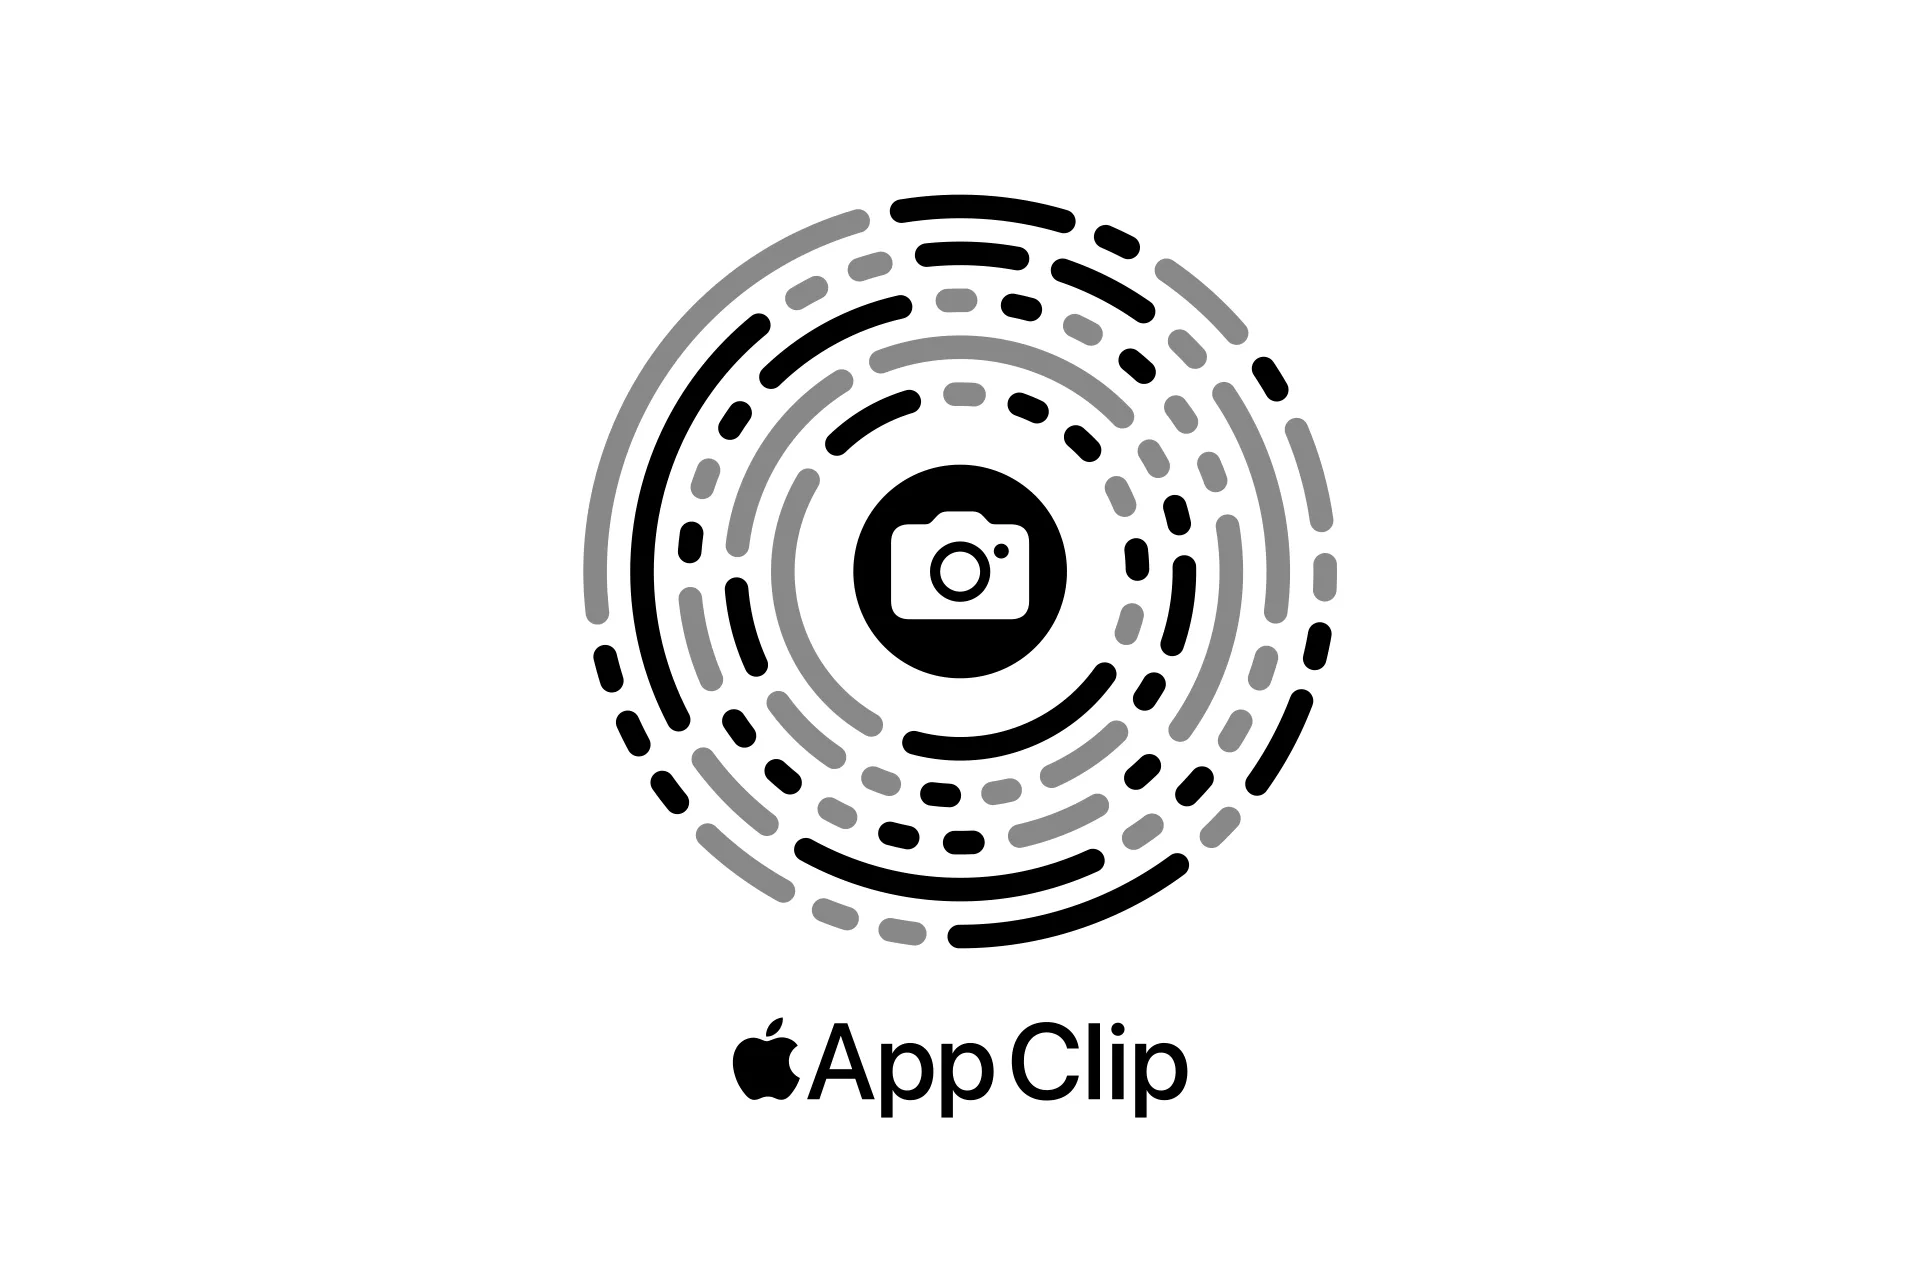 Scan this QR code to open the Farm Tales App Clip Demo